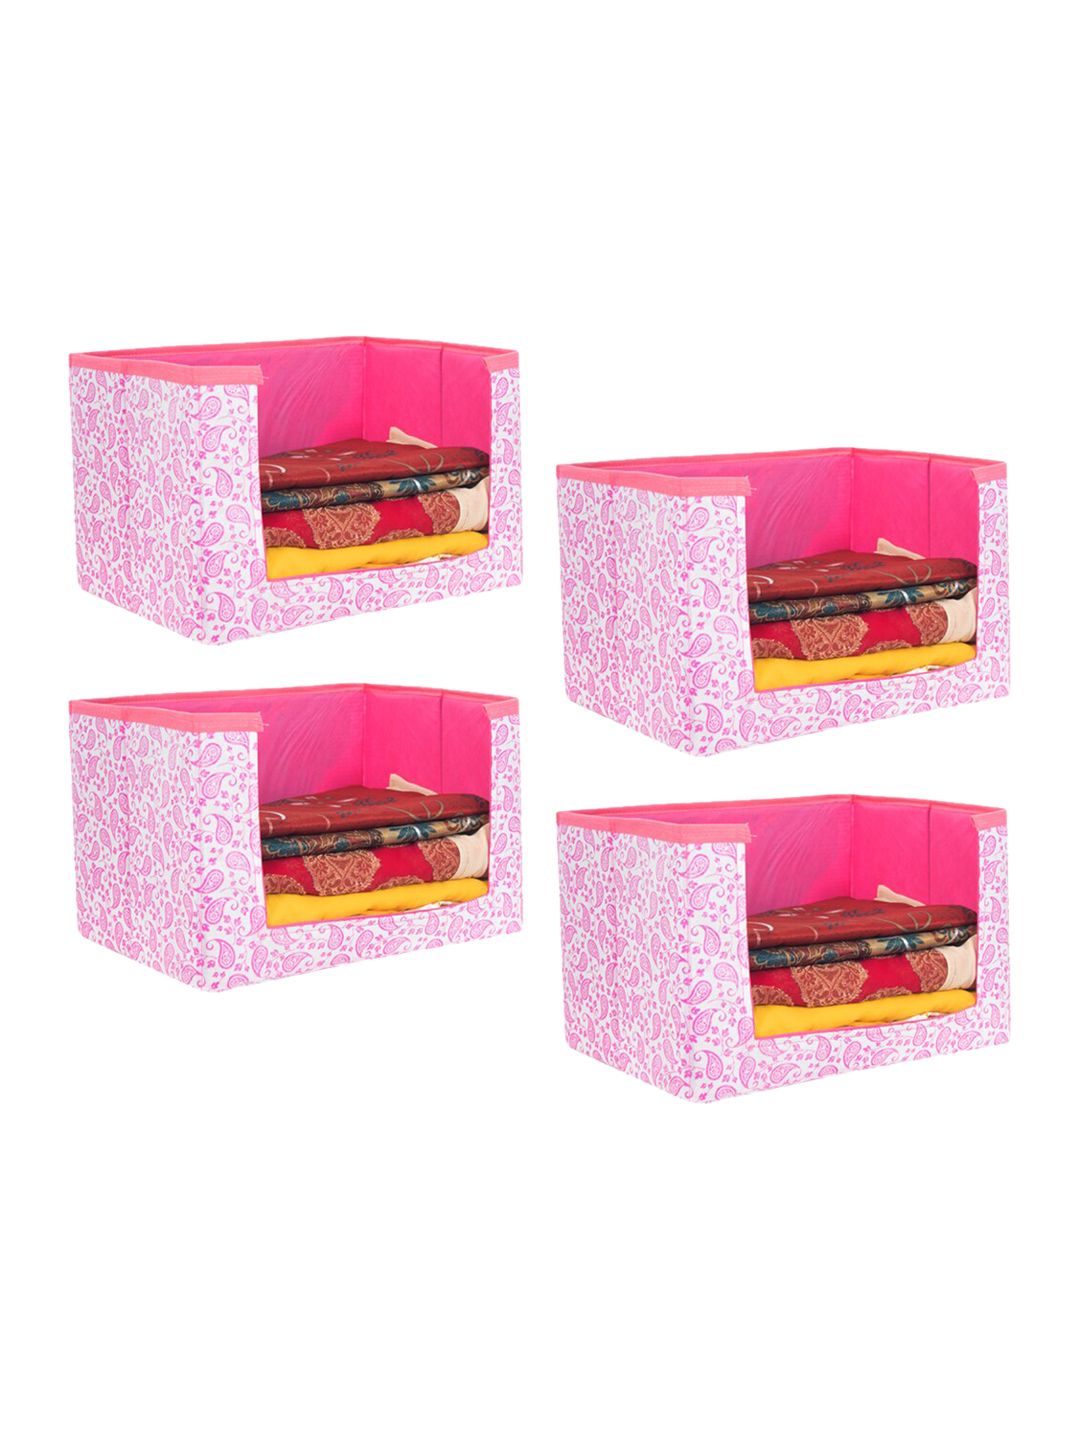 prettykrafts Set Of 4 White & Pink Printed Cloth Saree Stacker Organisers Price in India